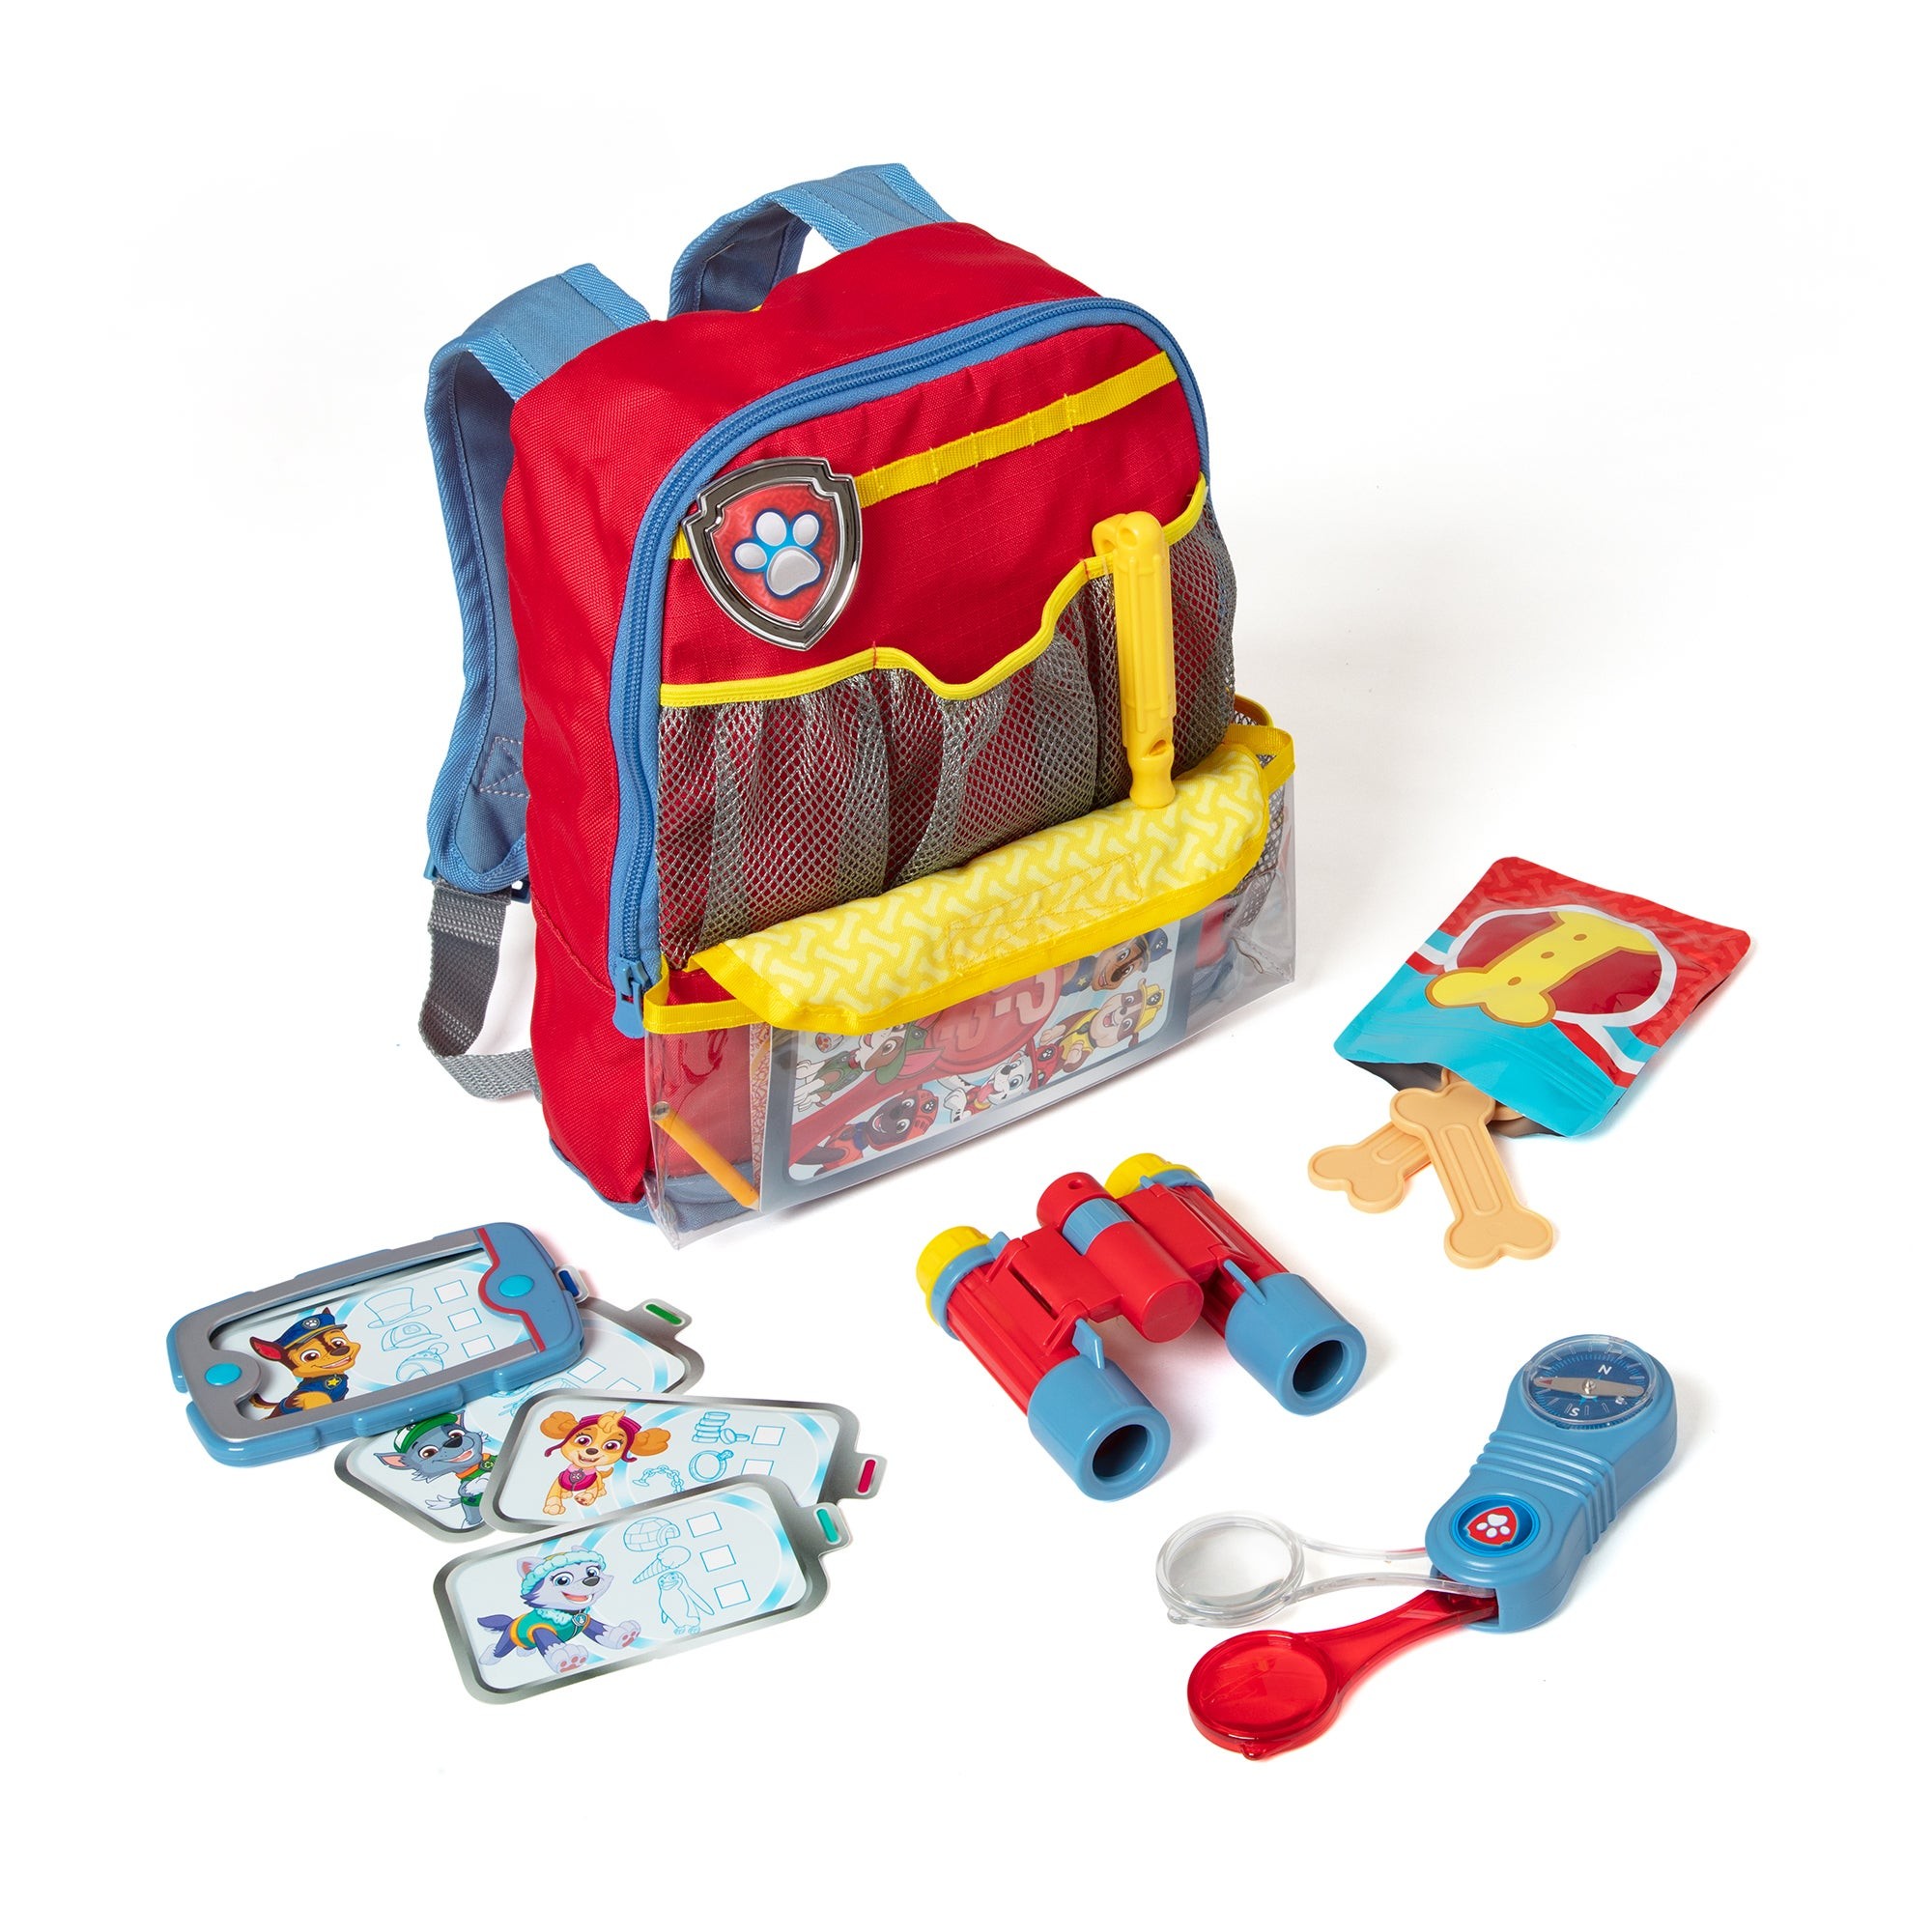 Paw Patrol Pup Back Backpack Role Play Set Ages 3+ Years